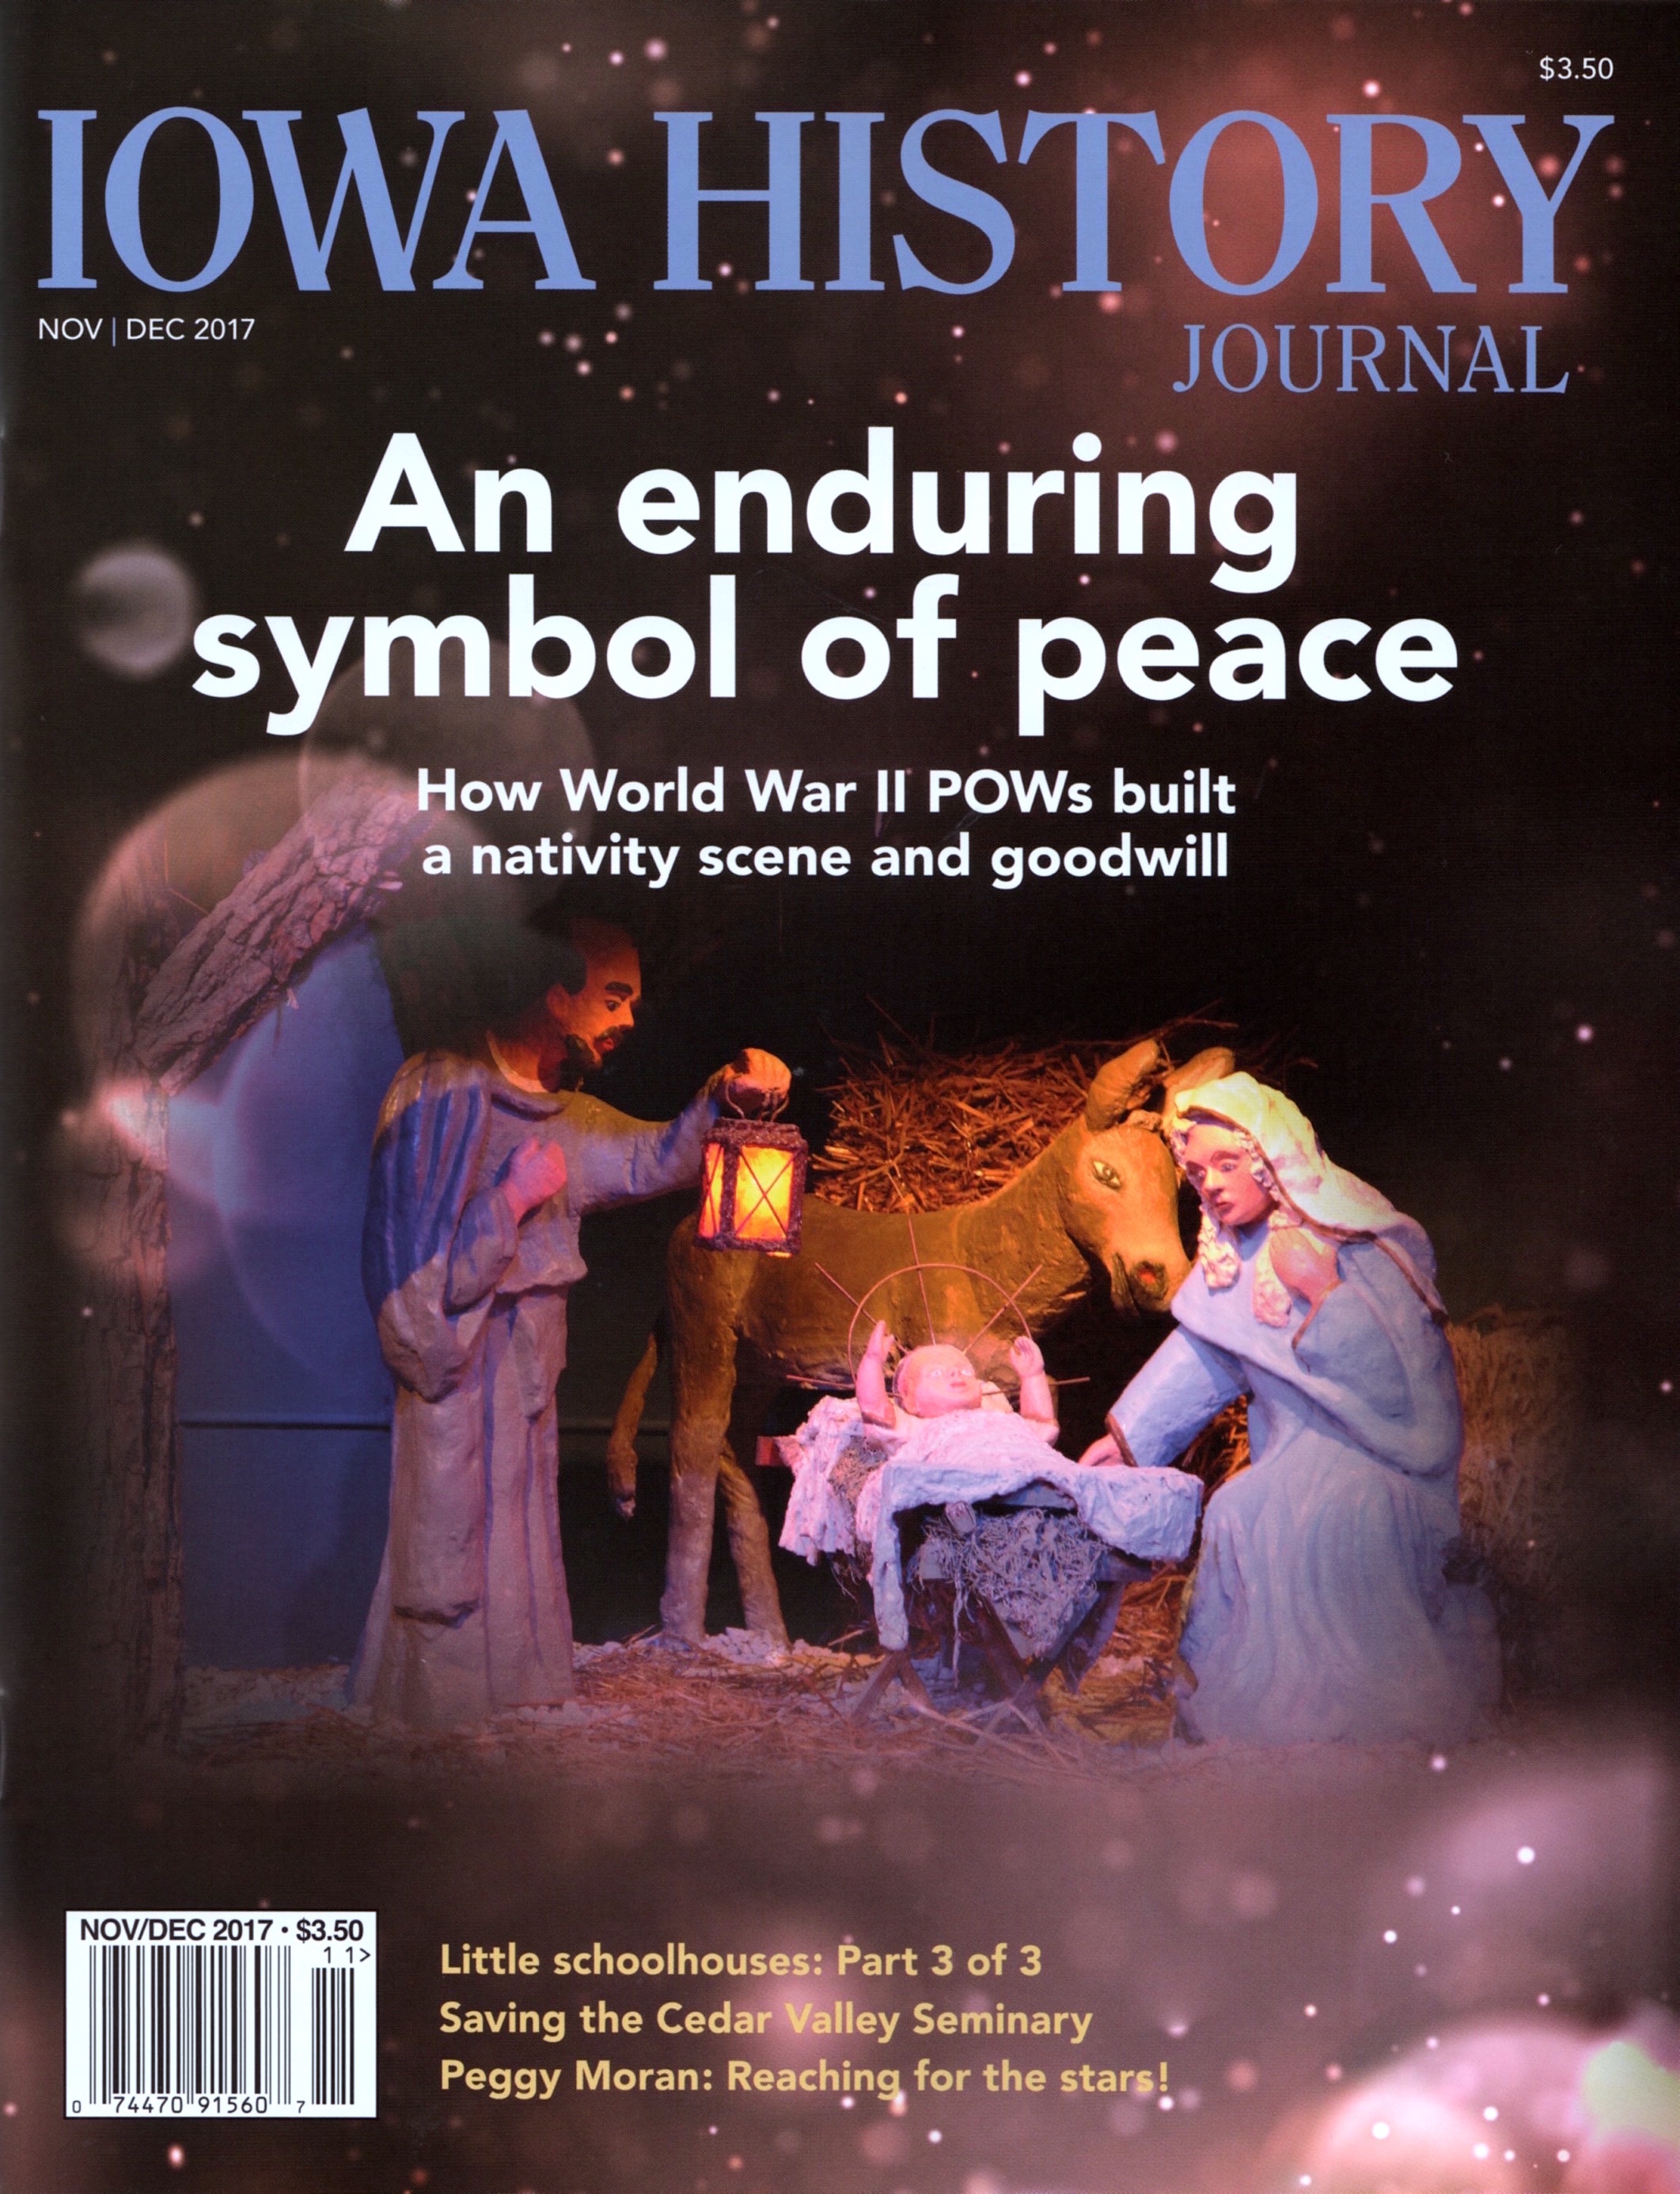 Volume 9, Issue 6 - Enduring symbol of peace